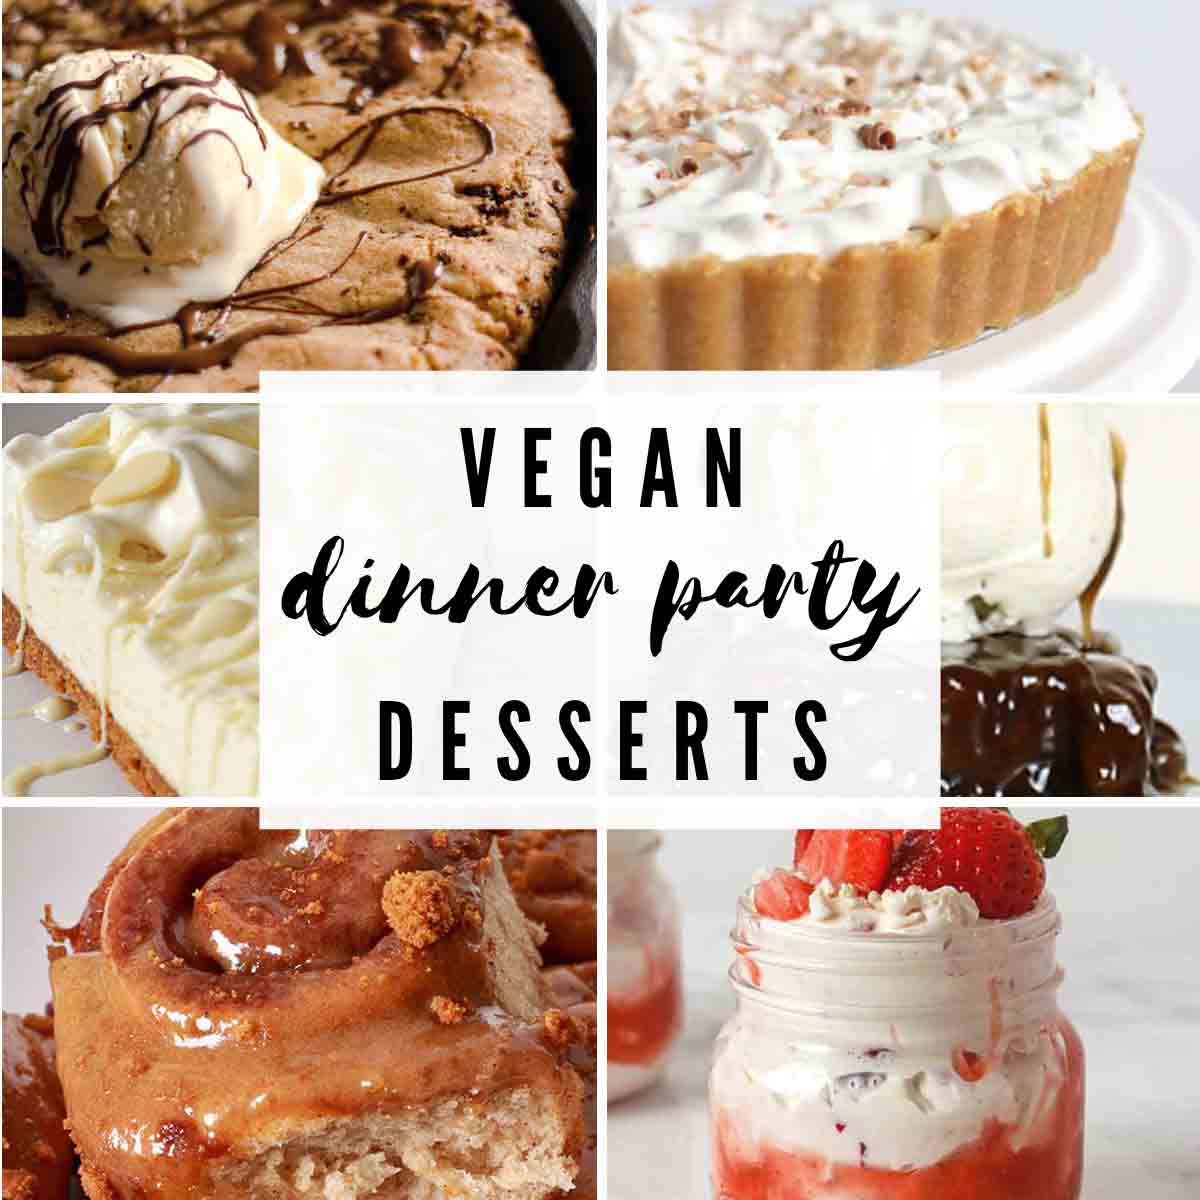 6 Dessert Images With Text Overlay That Reads 'vegan Dinner Party Desserts'